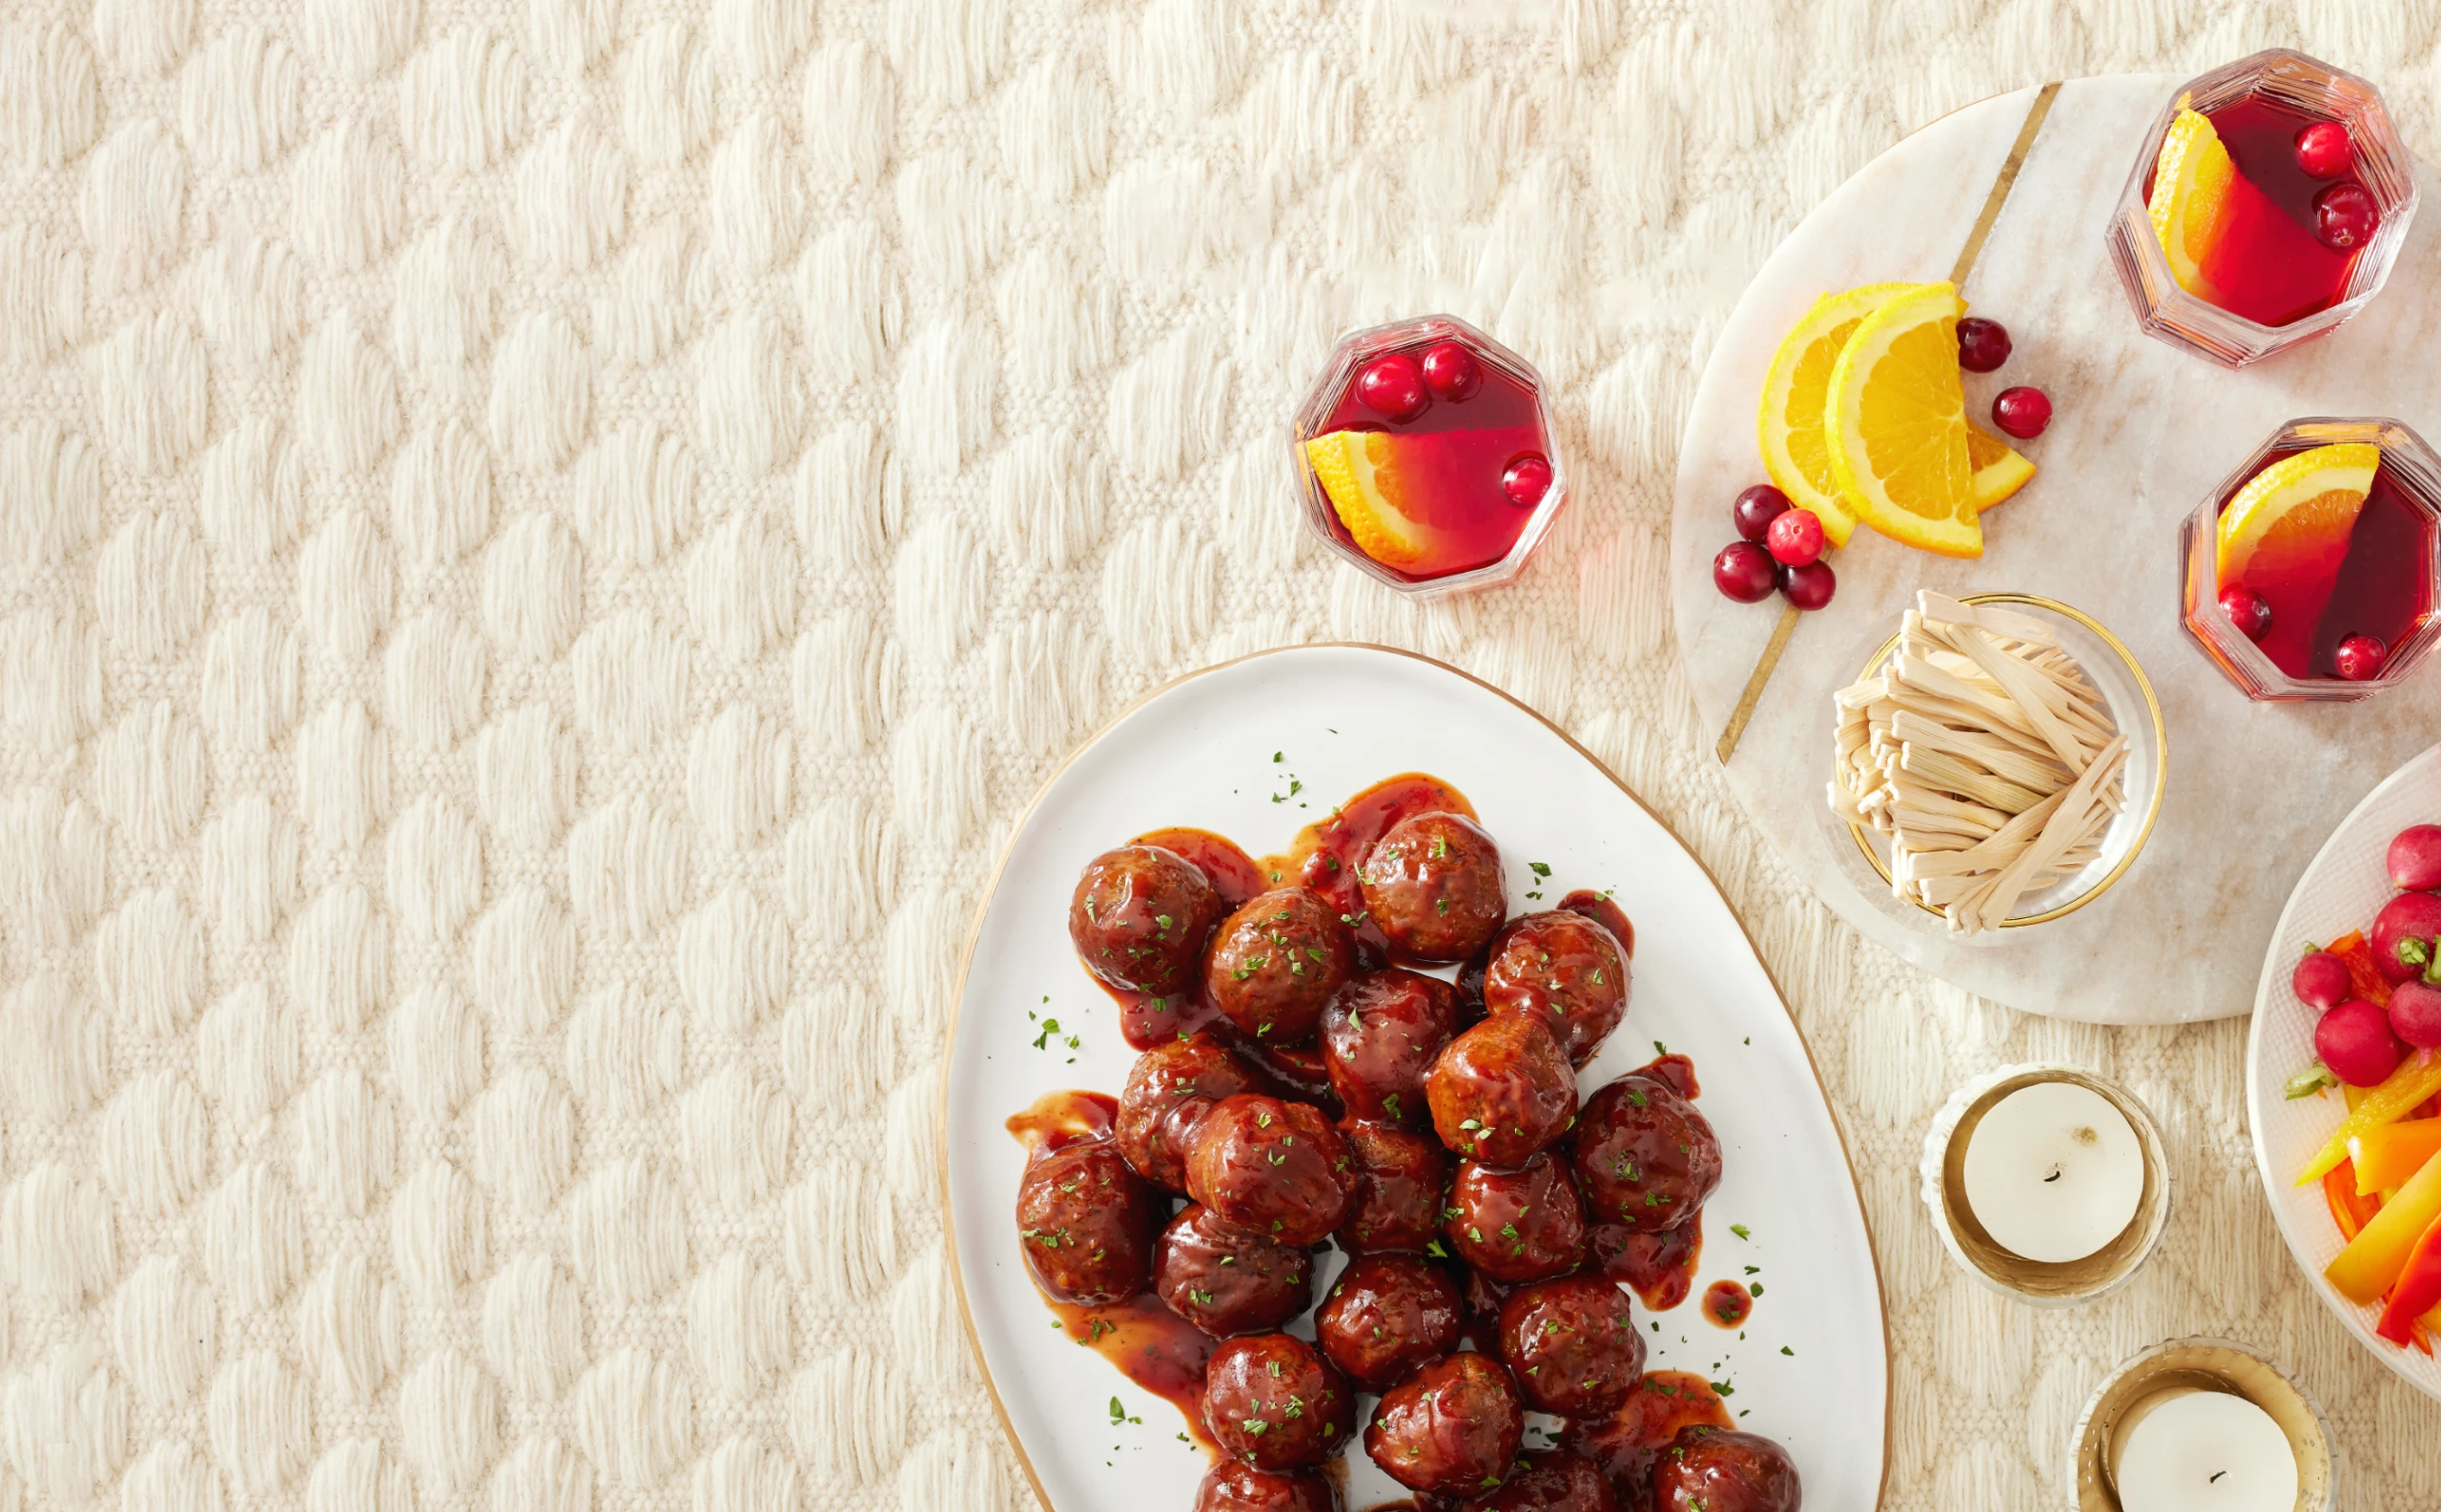 meatballs on a cream colored quilt background. cranberry and orange cocktails around the platter of meatballs